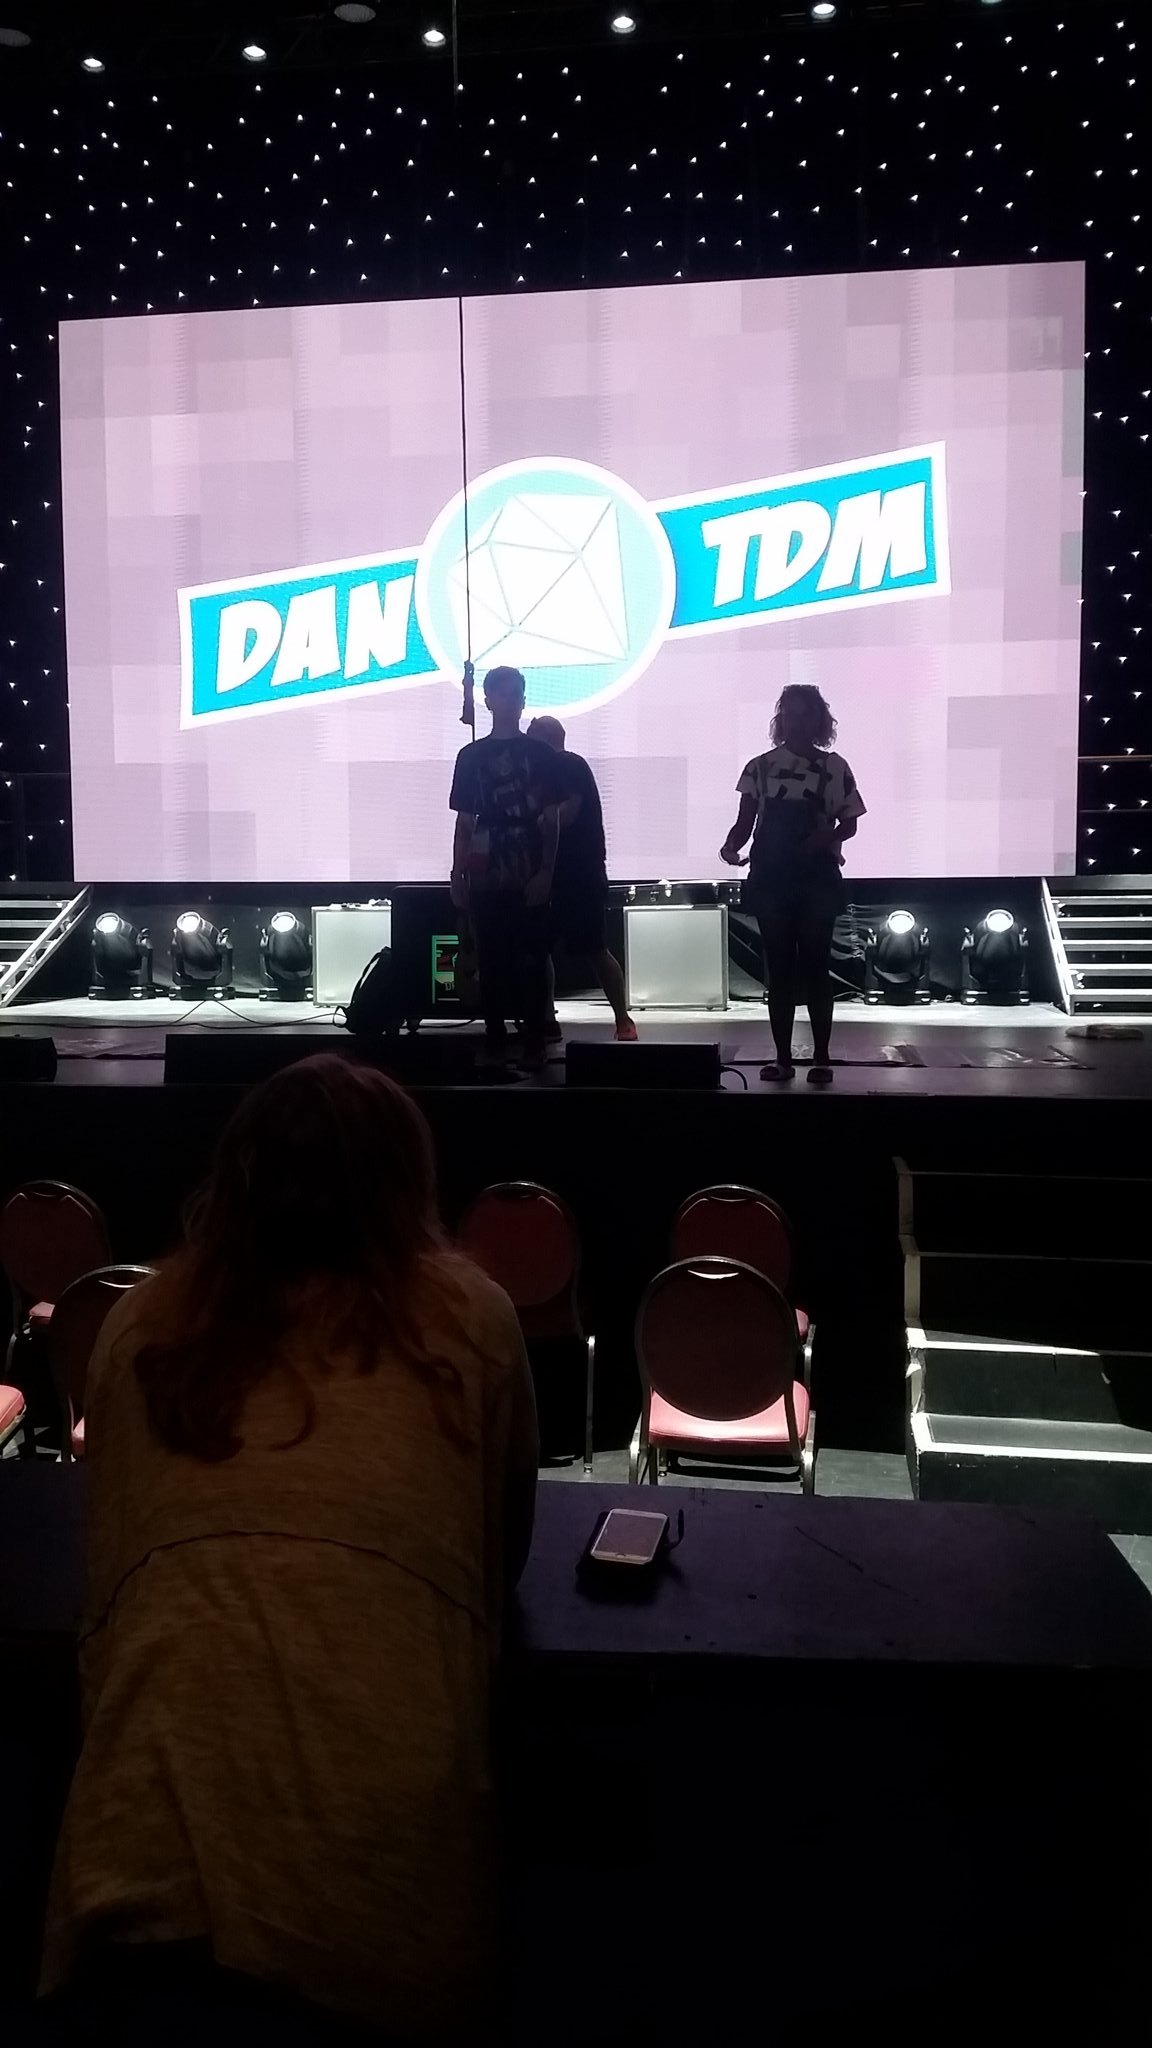 DanTDM on Tour & Live on Twitter "Dallas show 2, are you ready? VIP